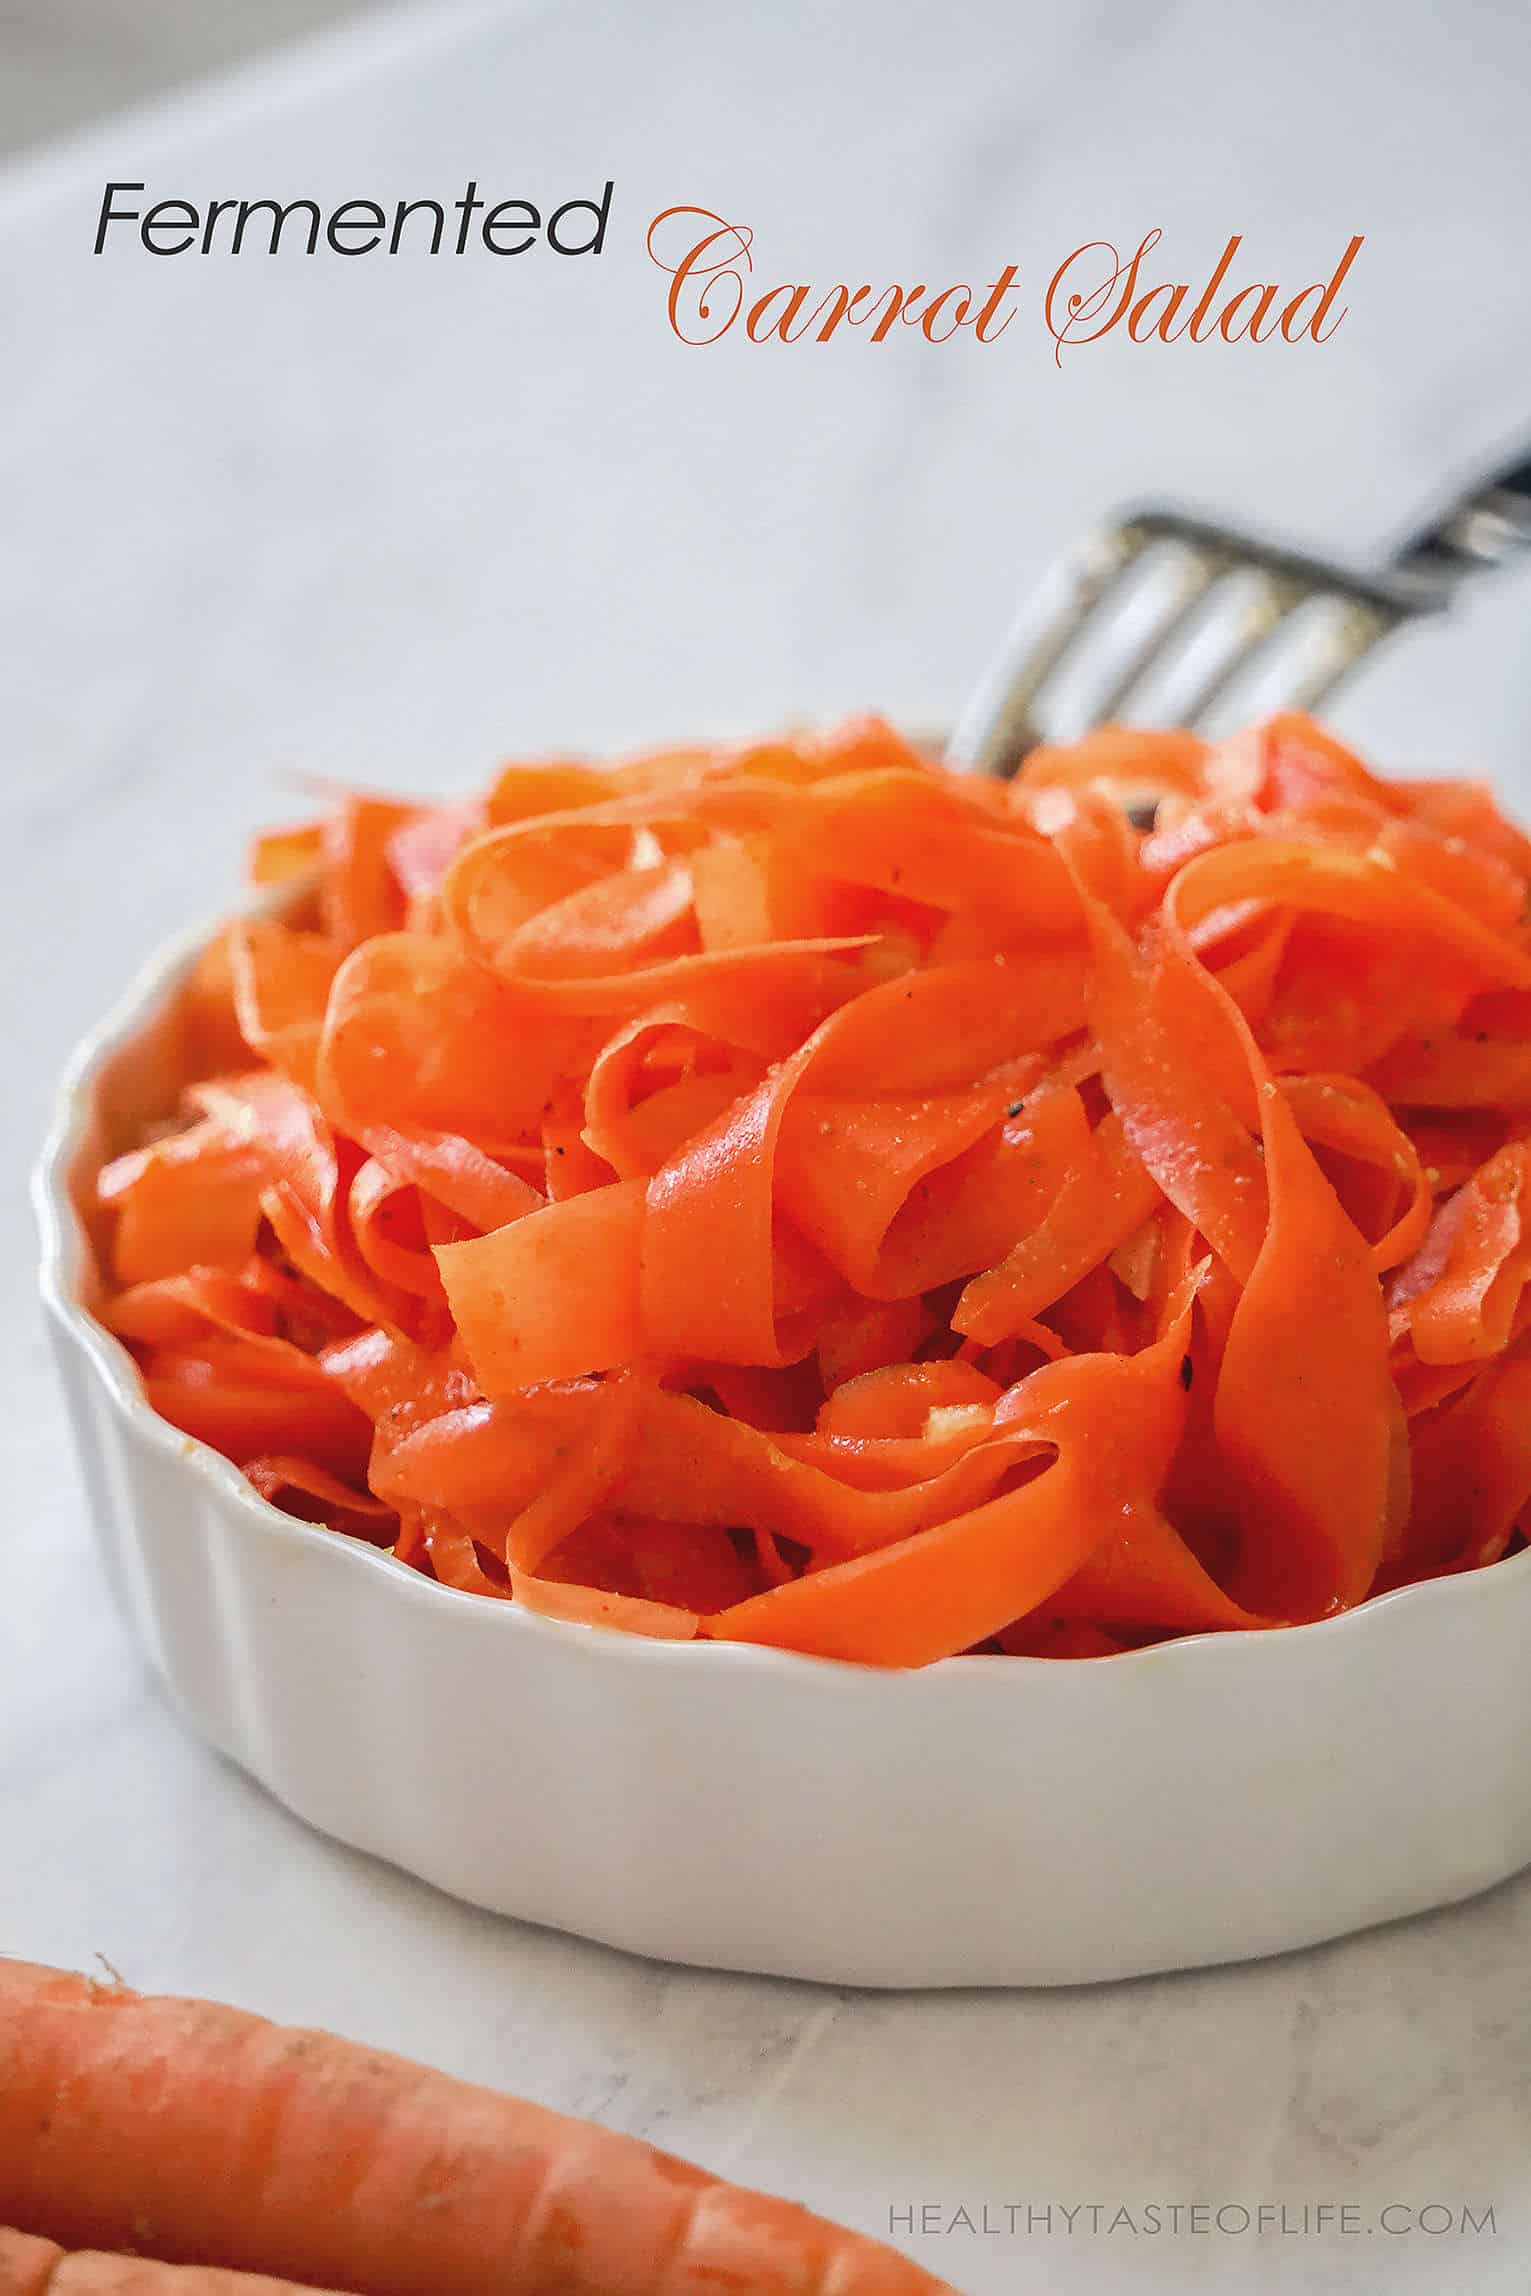 Fermented Carrot Salad made with fermented shaved carrots and a mix of spices.